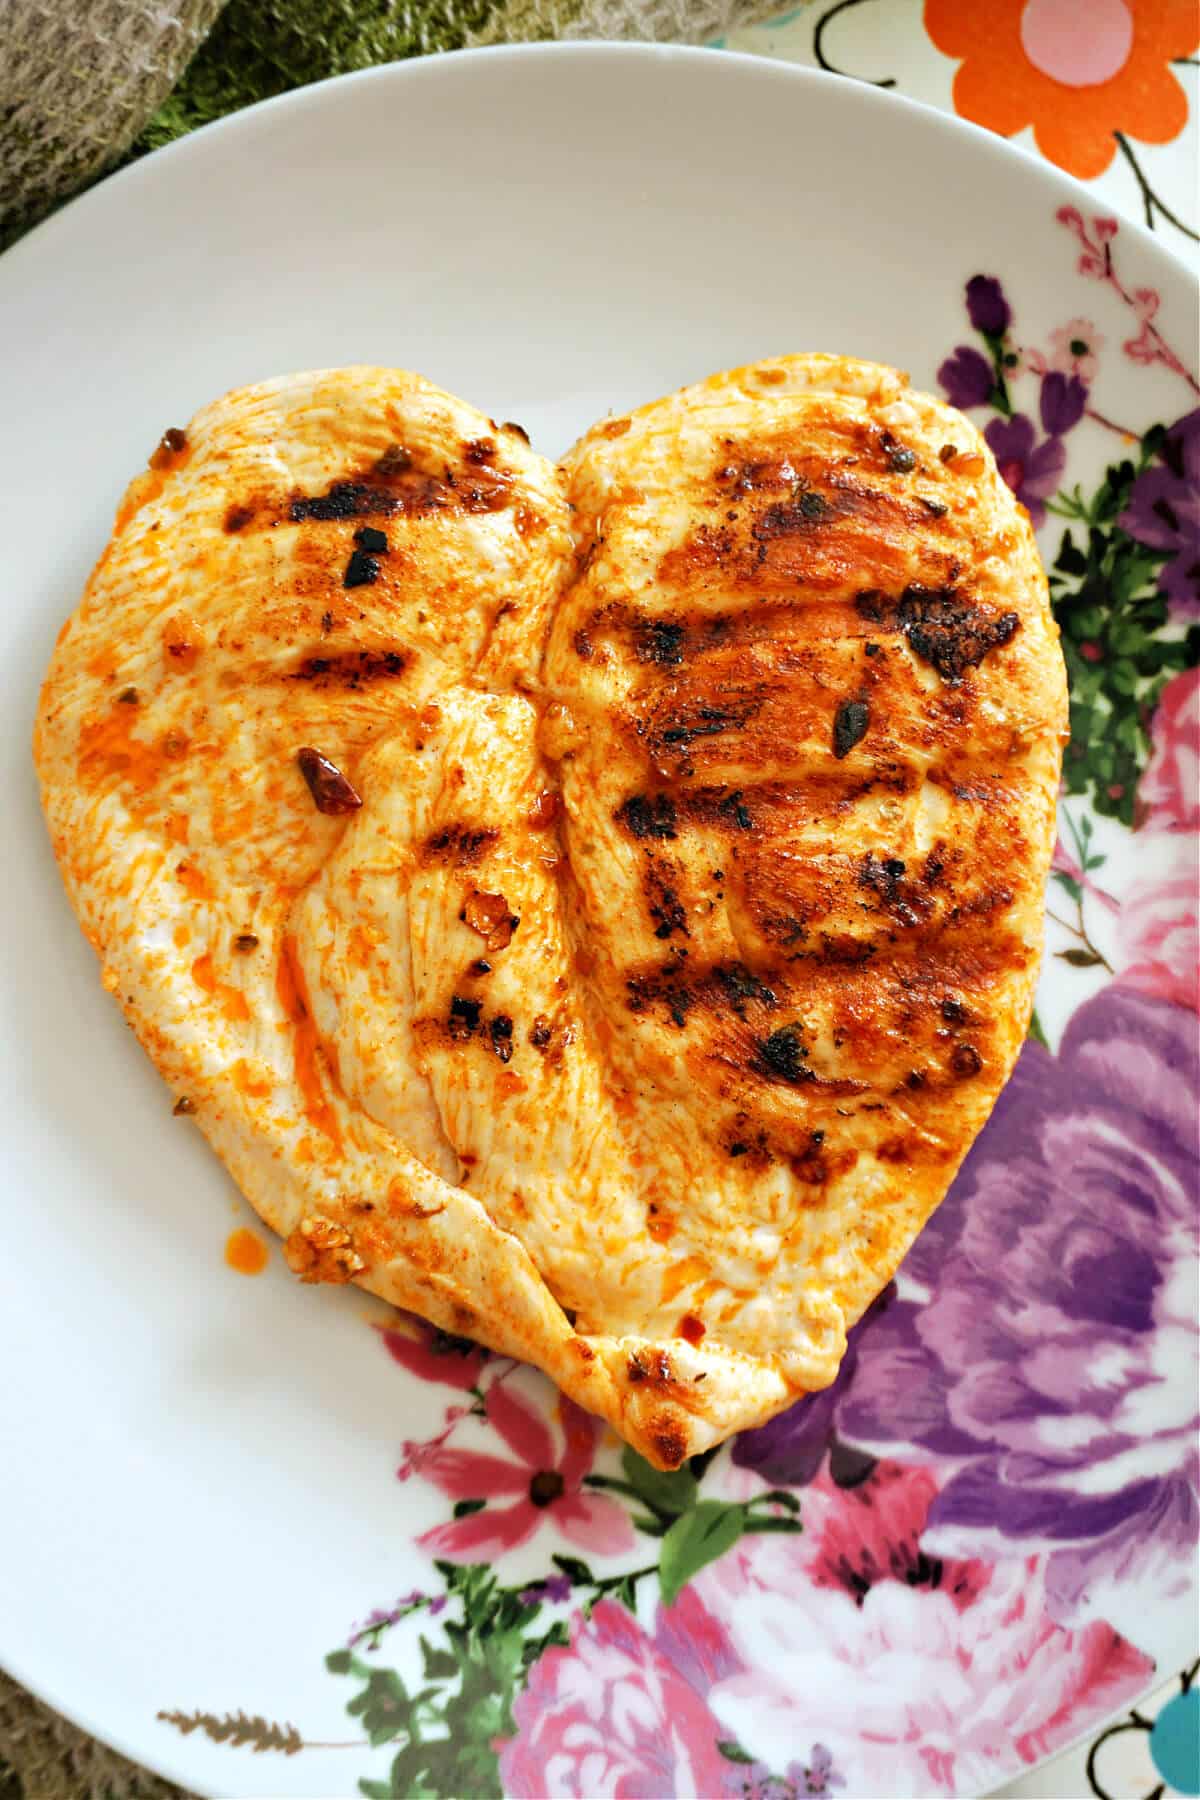 A butterfly chicken breast on a plate.